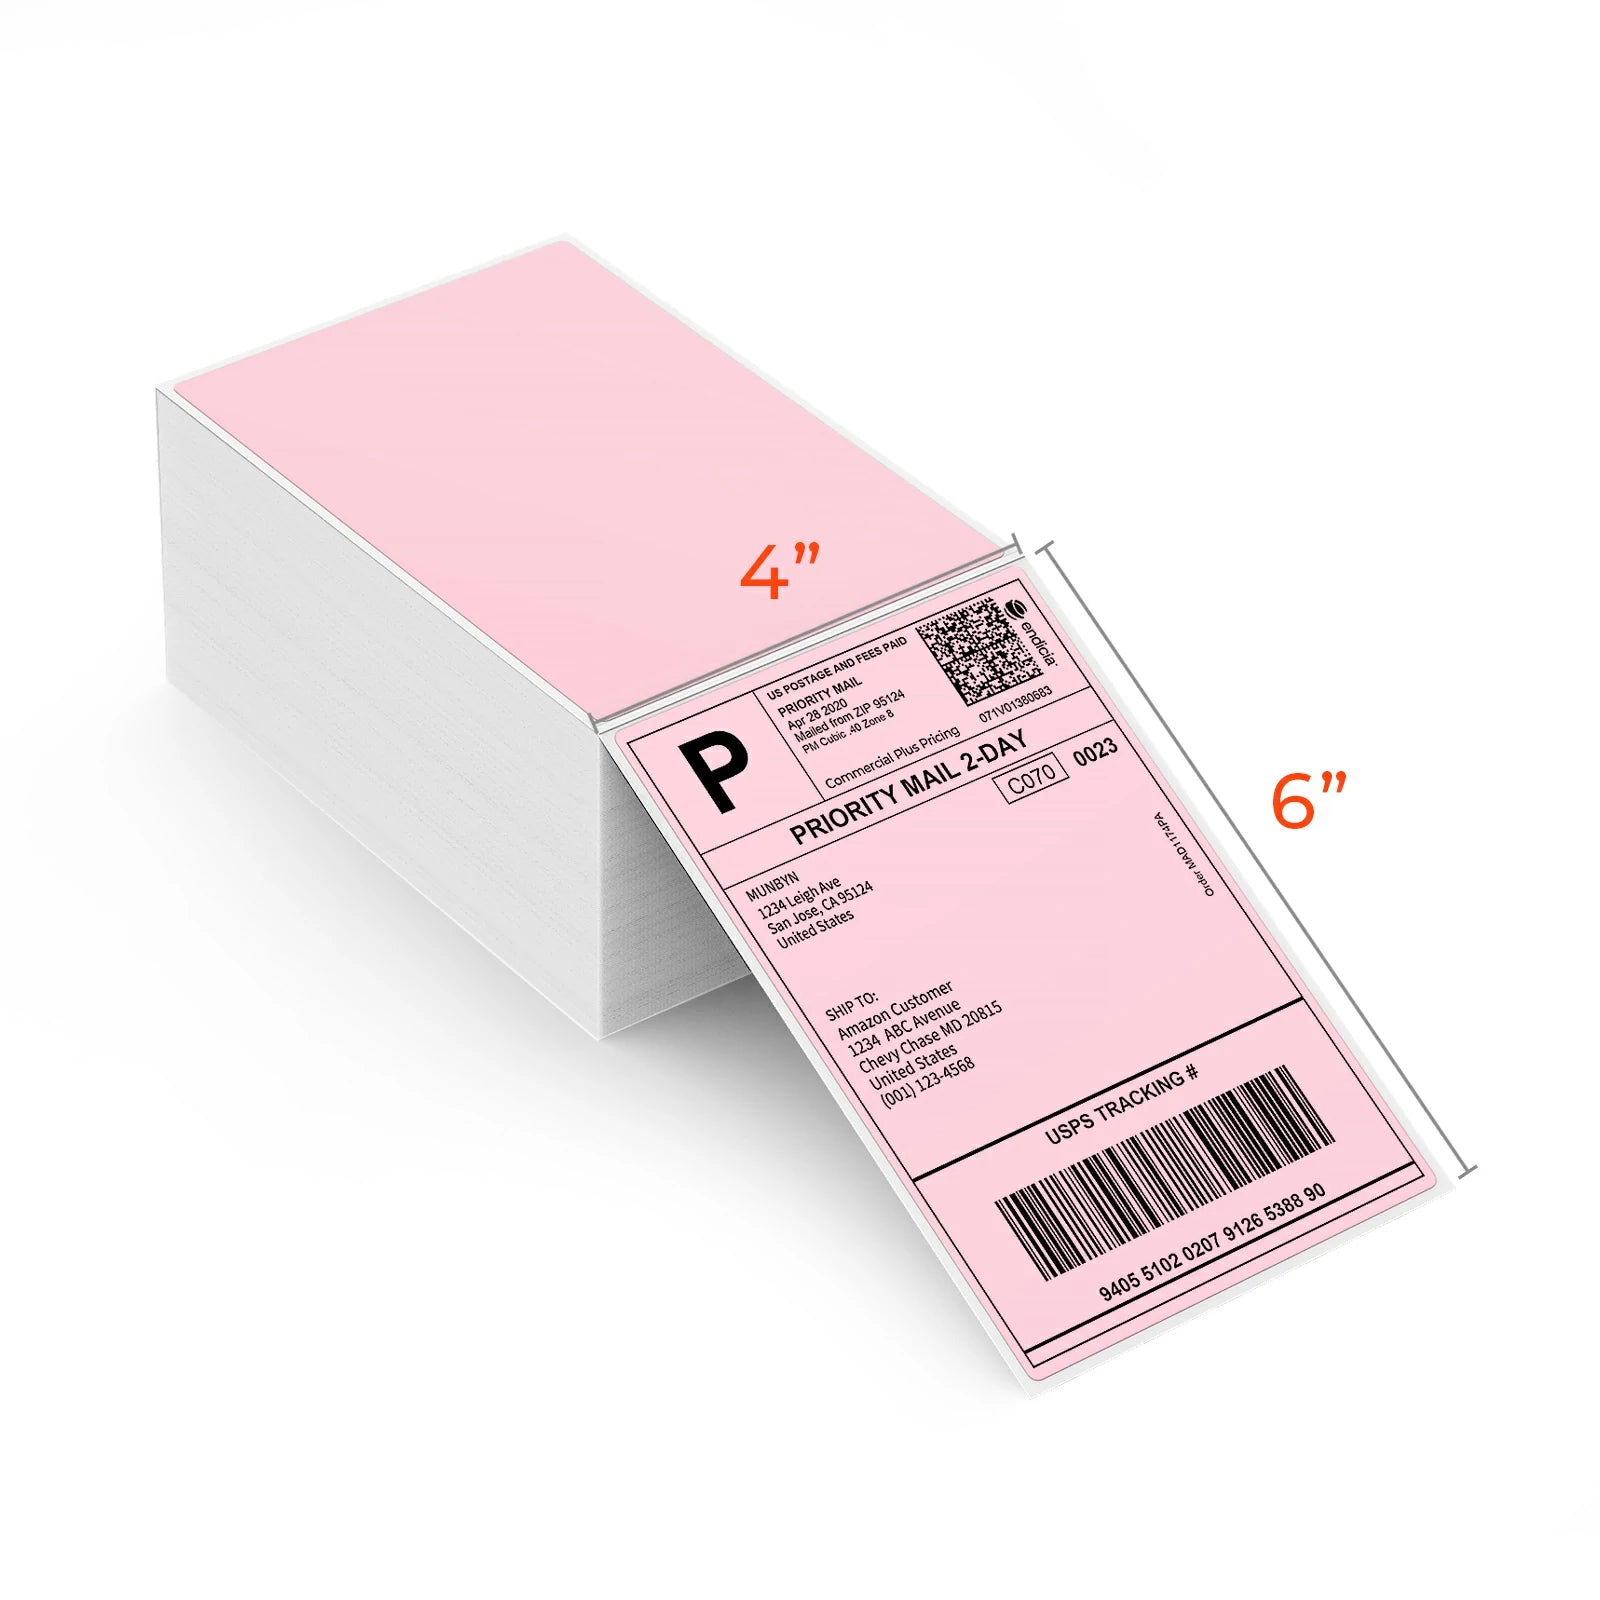 4X6 Thermal Label pink, Thermal Direct Shipping Label, 4x6 Fan-Fold Labels, Exclusive Color Options, 500 Labels Per Pack, BPA-Free, Find electronics, fashion, accessories, grocery and more, shipping labels, address labels, mailing labels, product labels, FBA labels, barcodes, name tag stickers, compatible to many thermal printers like Munbyn and Rollo. More choices to choose from!